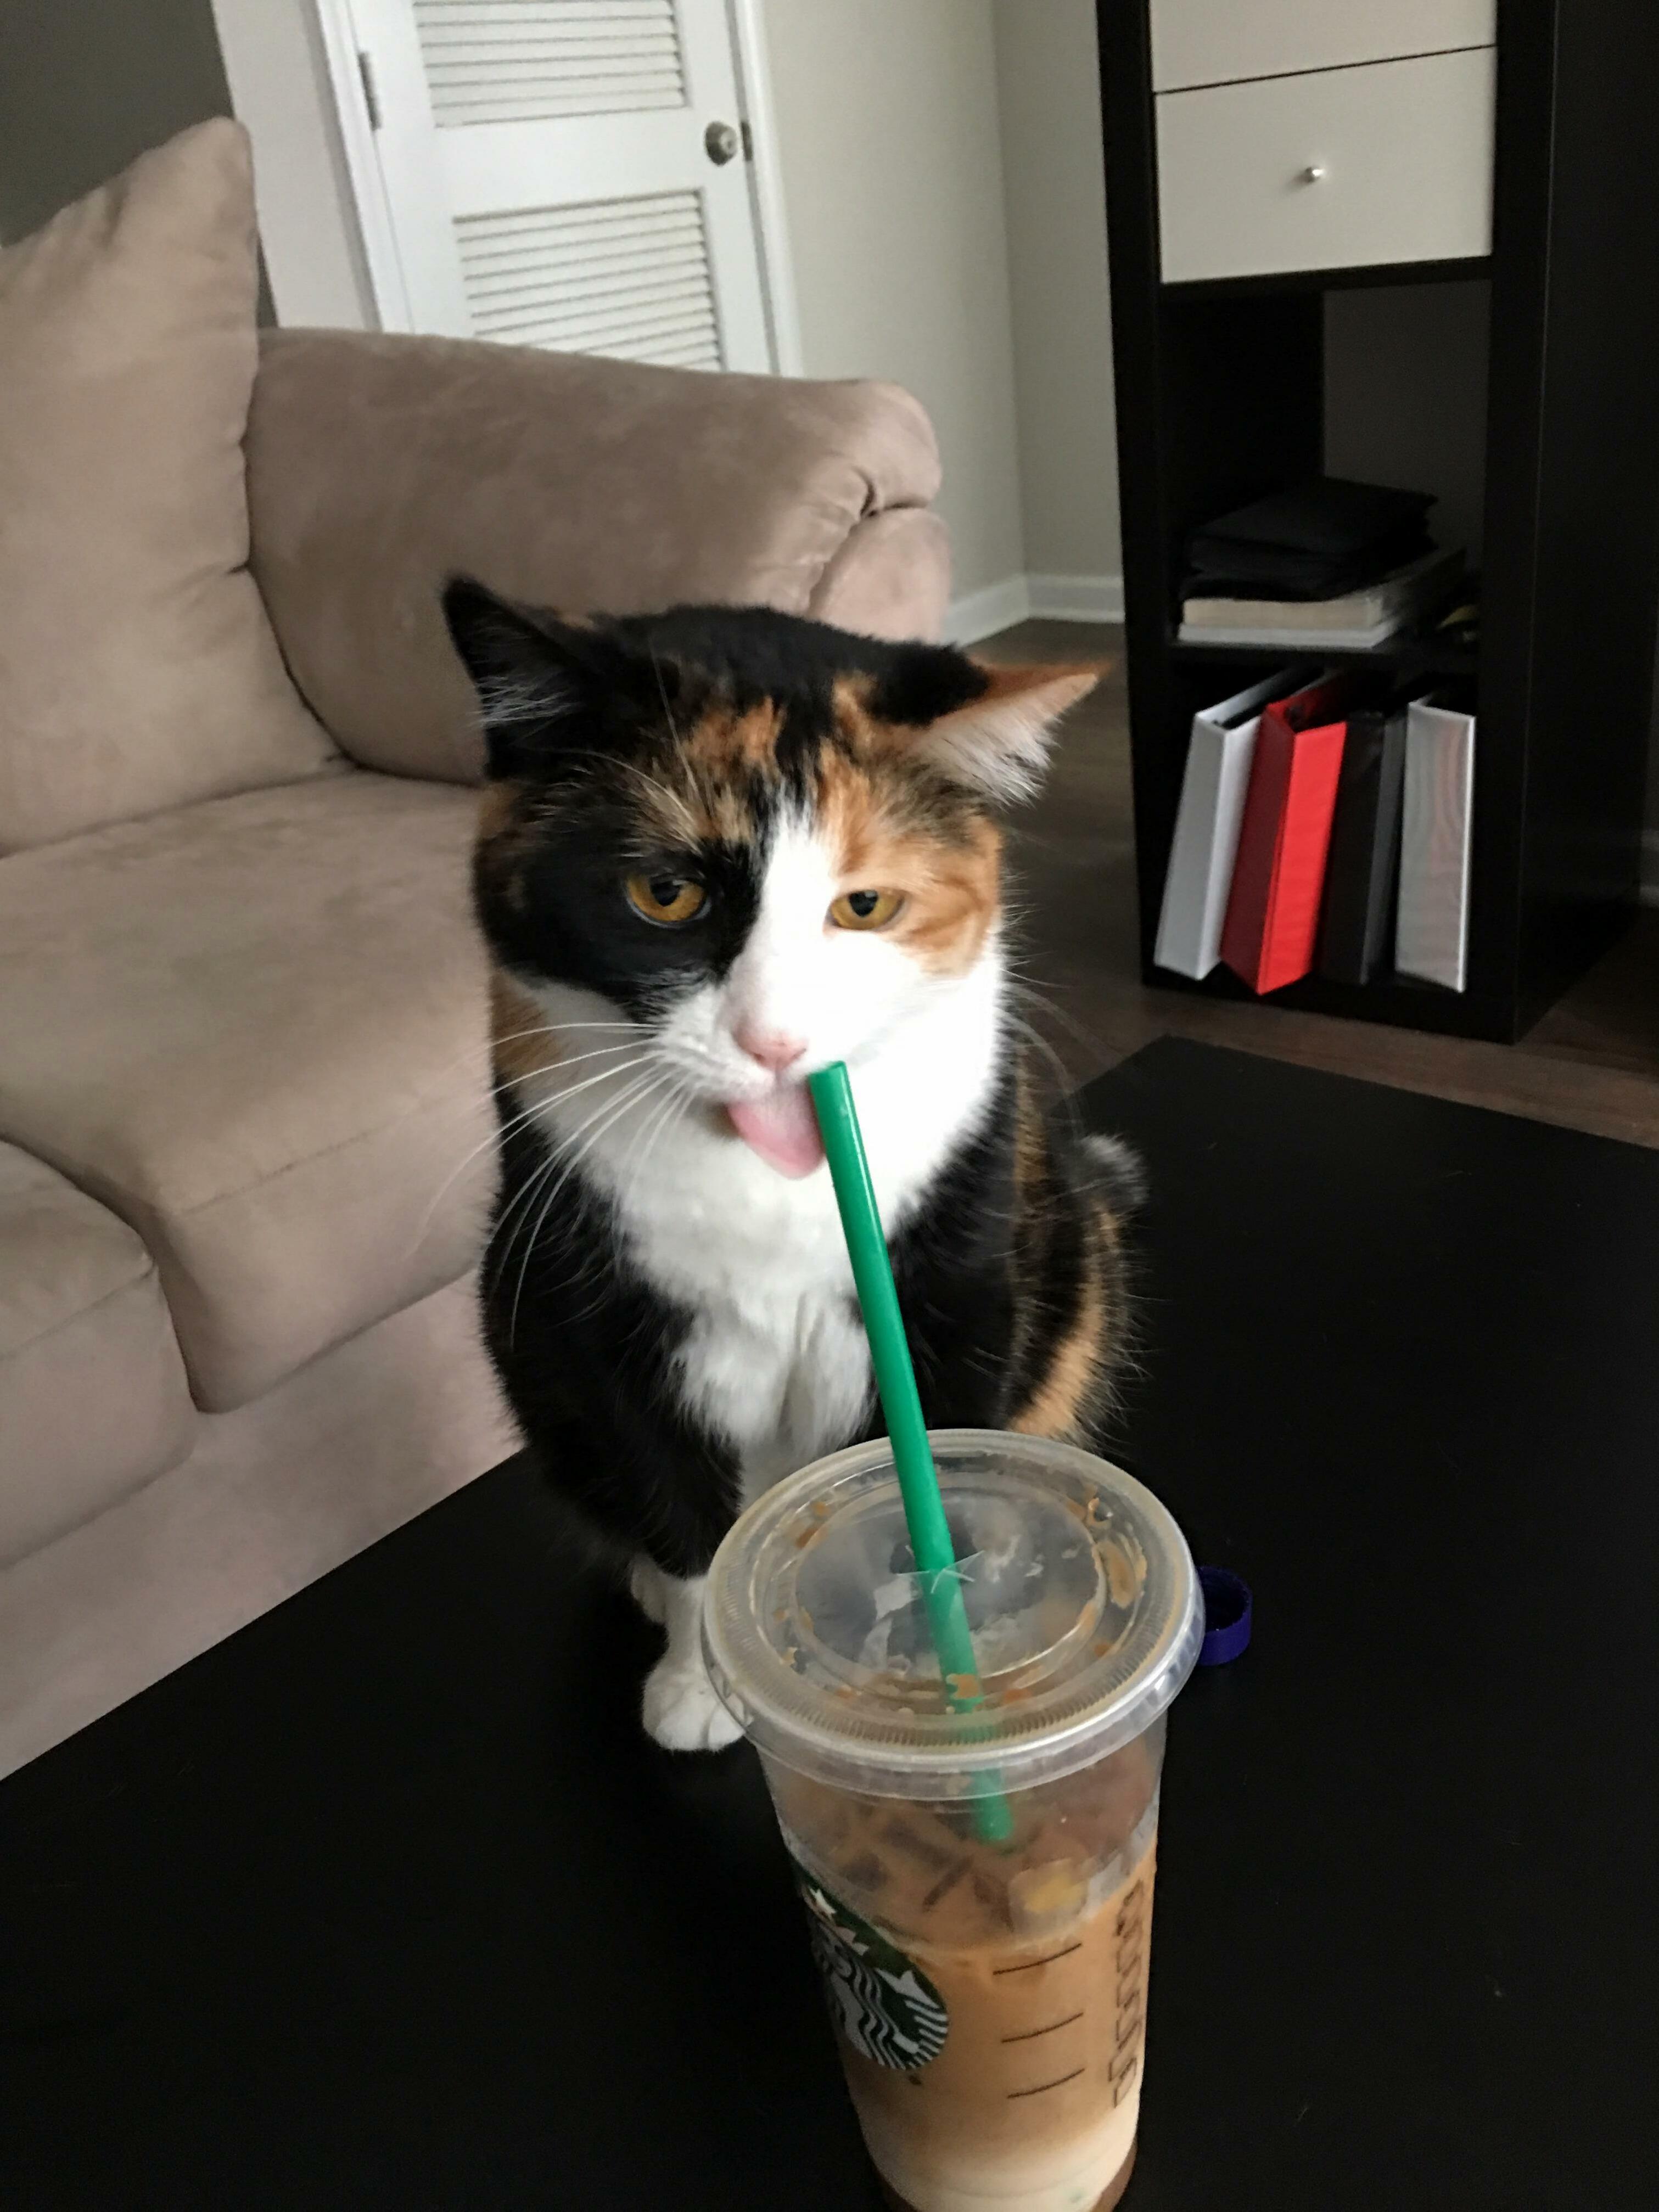 She wont let me talk to her until after coffee.